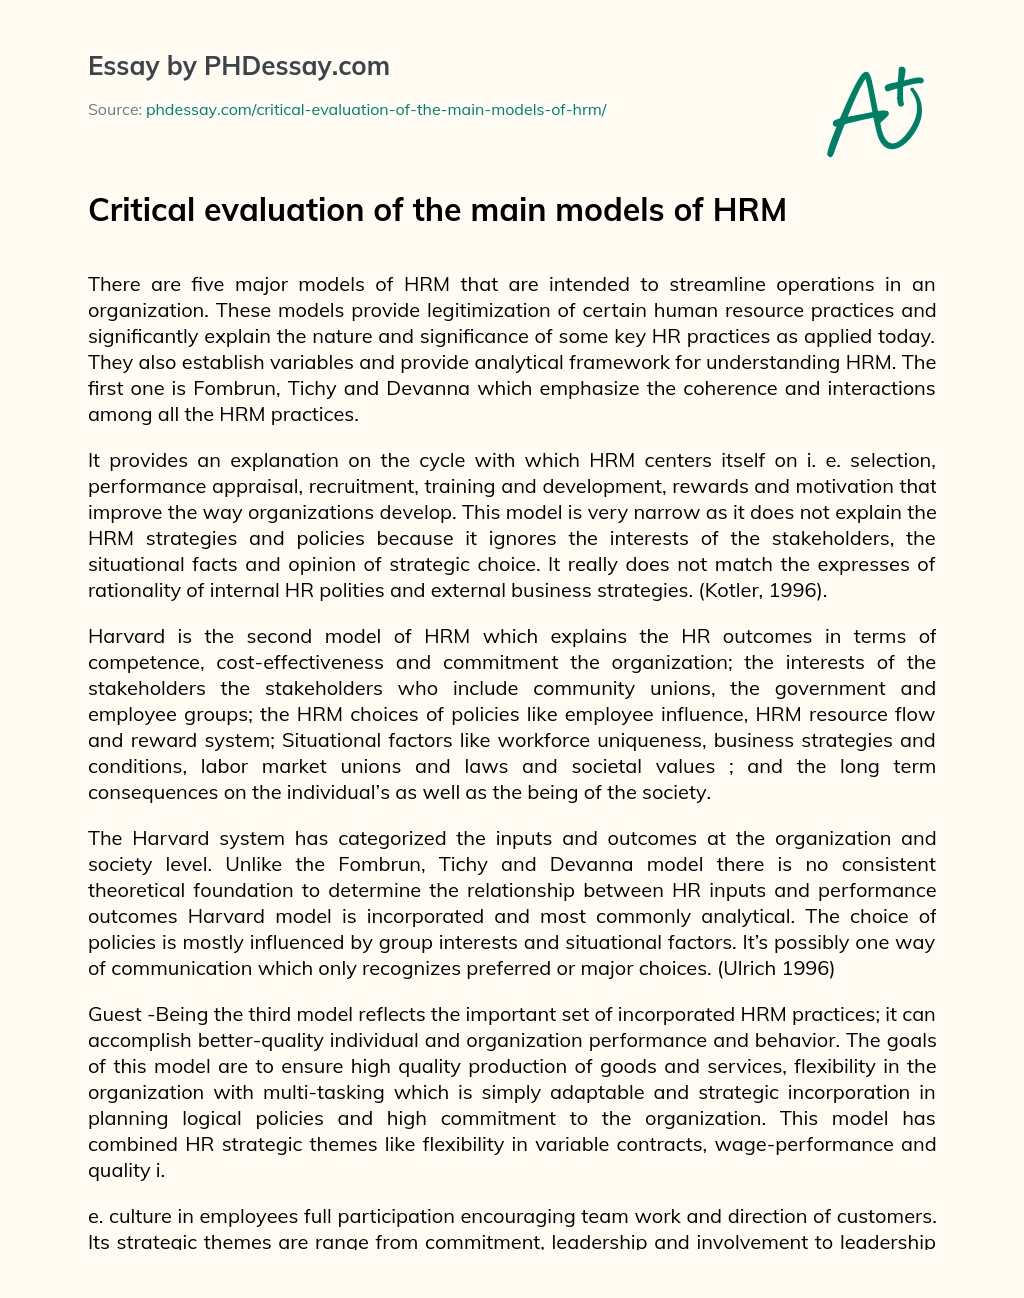 Critical evaluation of the main models of HRM essay